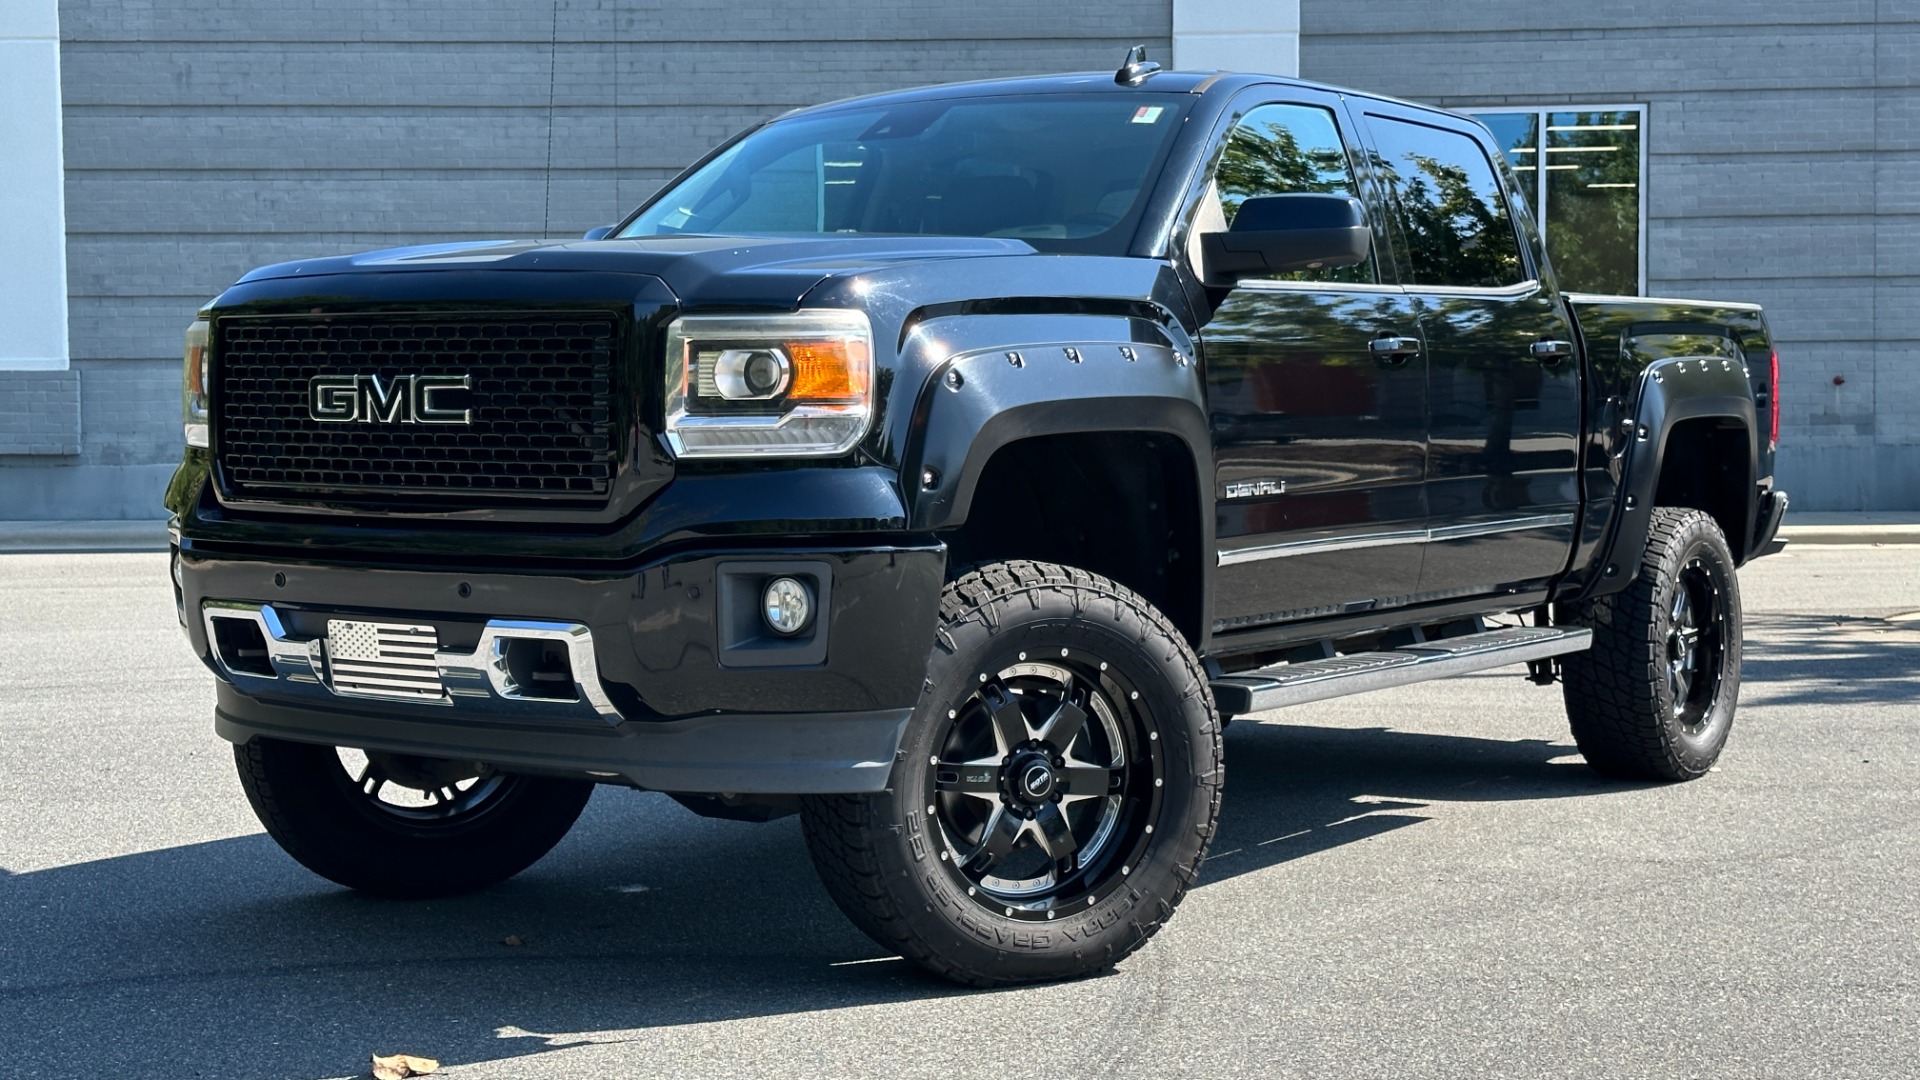 Used 2015 GMC Sierra 1500 DENALI / LIFT KIT / UPGRADED WHEELS / SUNROOF / 6.2L V8 for sale $33,995 at Formula Imports in Charlotte NC 28227 1